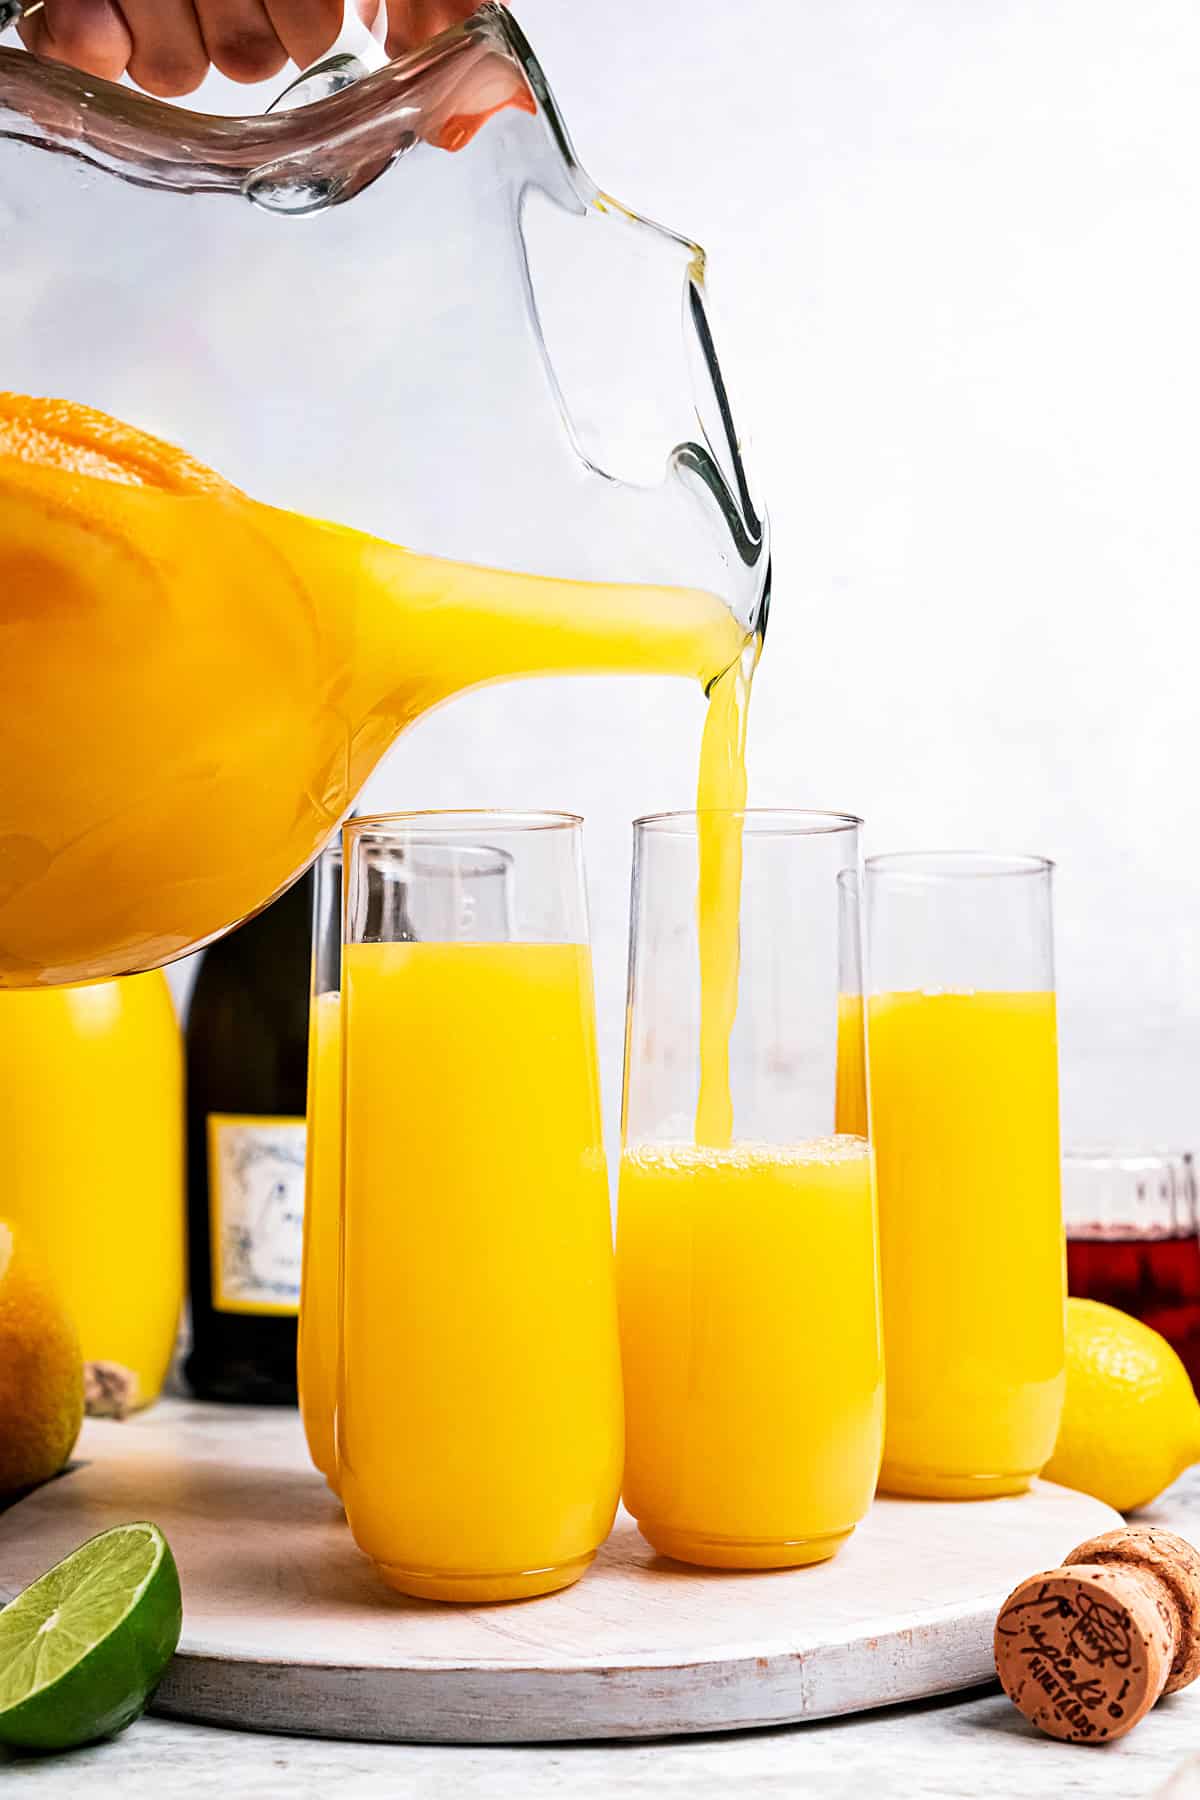 Orange juice being poured from a pitcher into flute glasses on a tray.